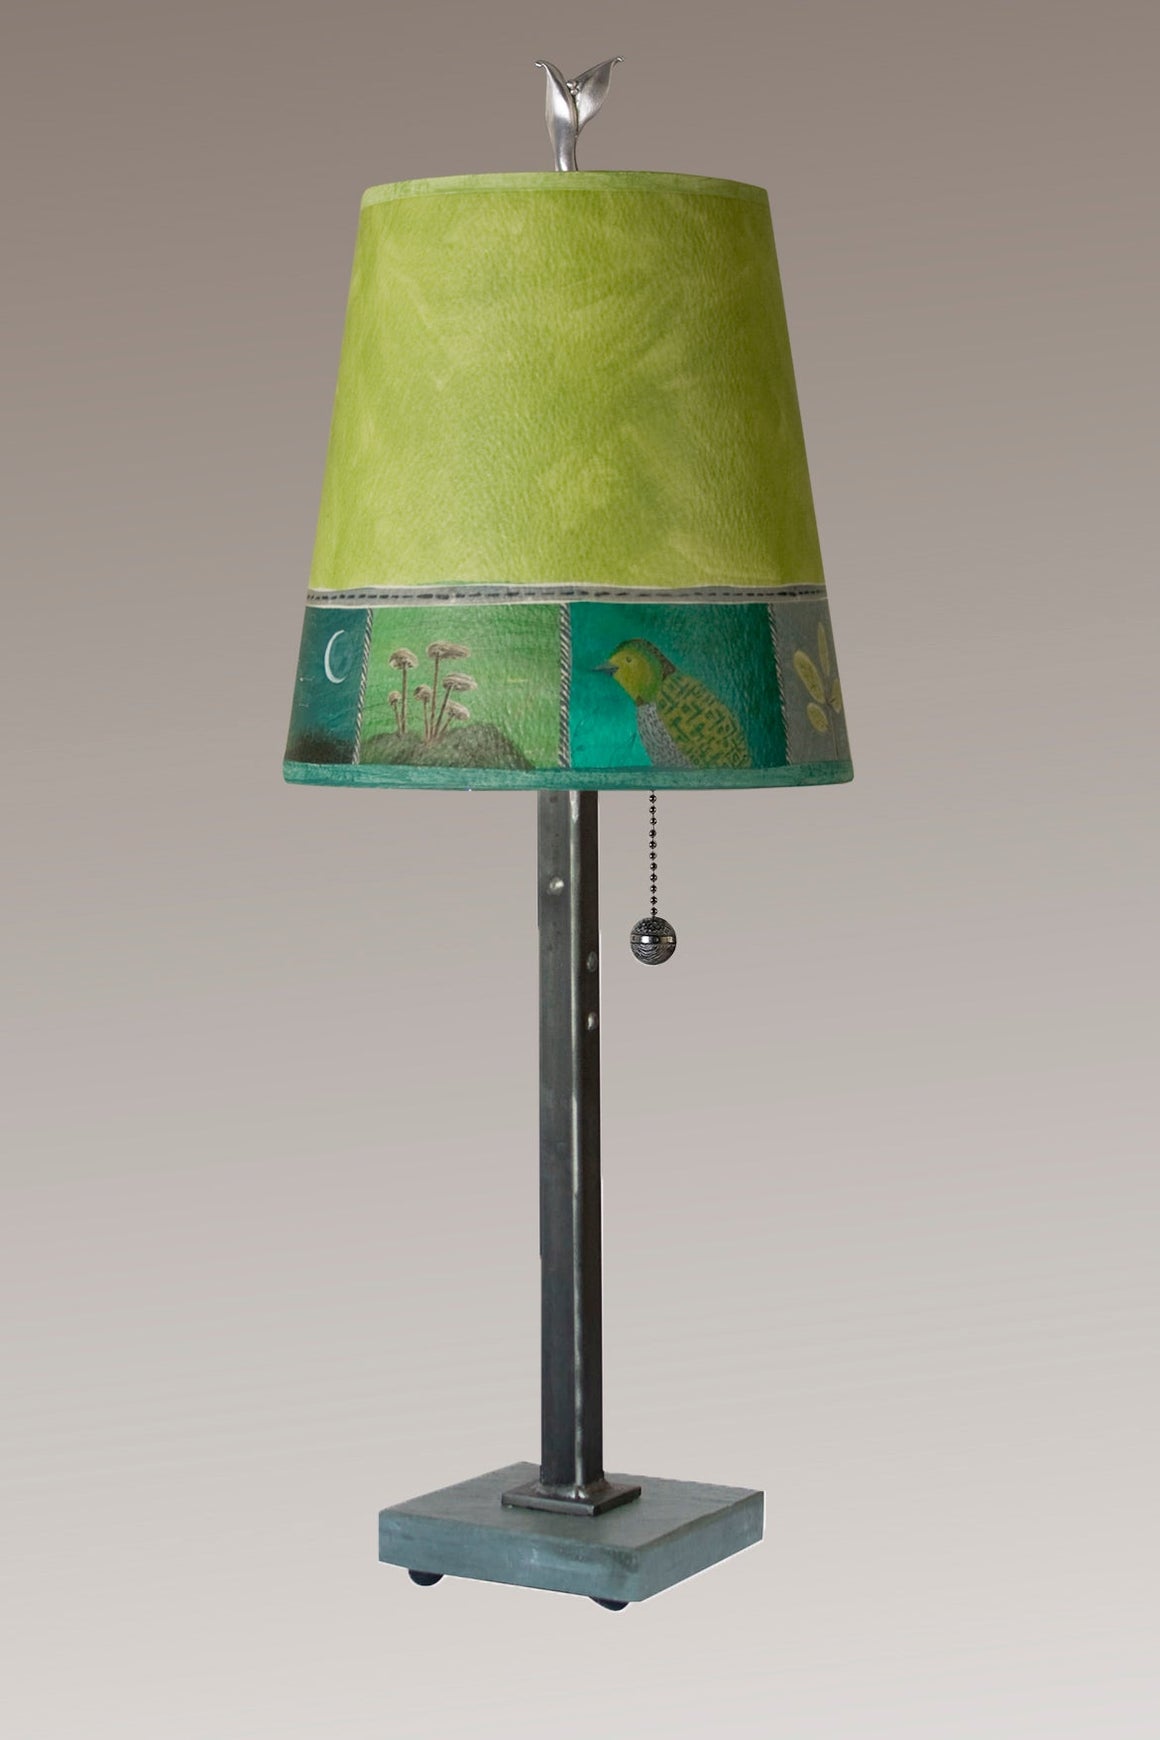 Steel Table Lamp with Small Drum Shade in Woodland Trails in Leaf